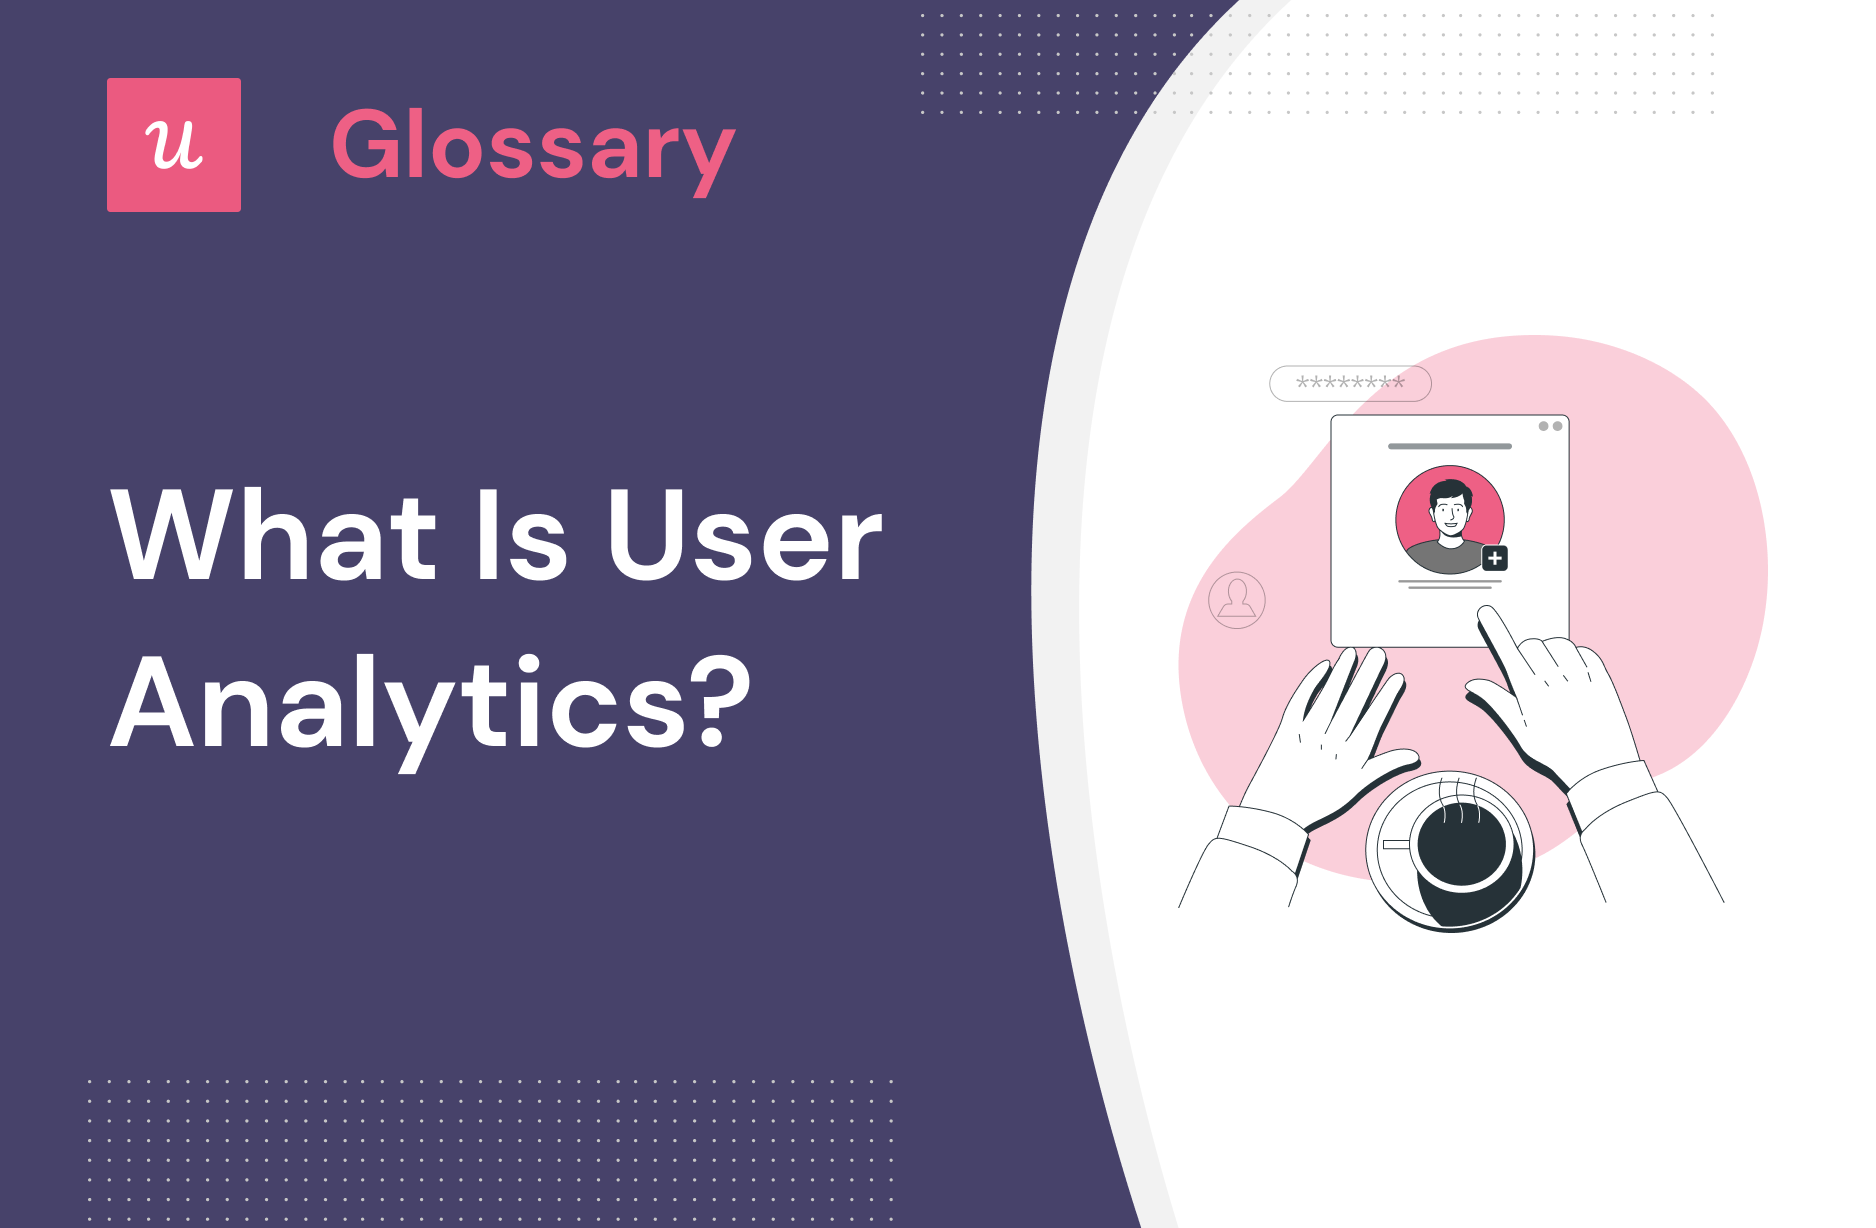 What is User Analytics?